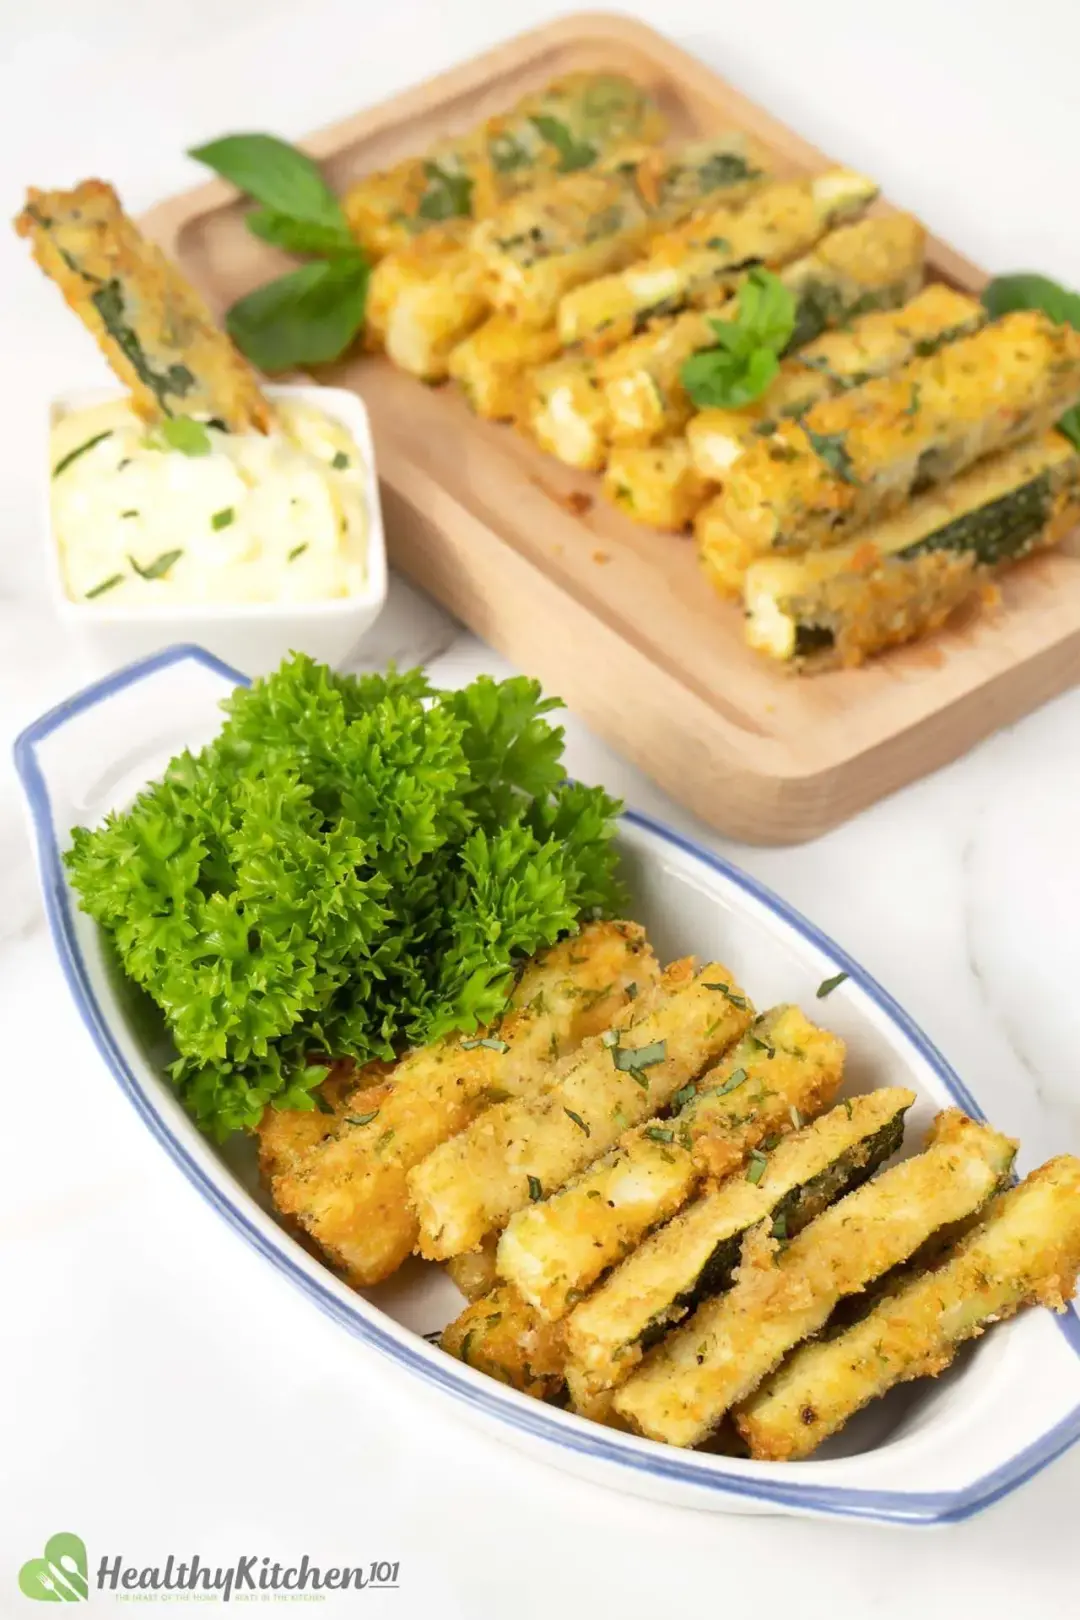 Zucchini fries served with vibrant parsley and mayonnaise dipping